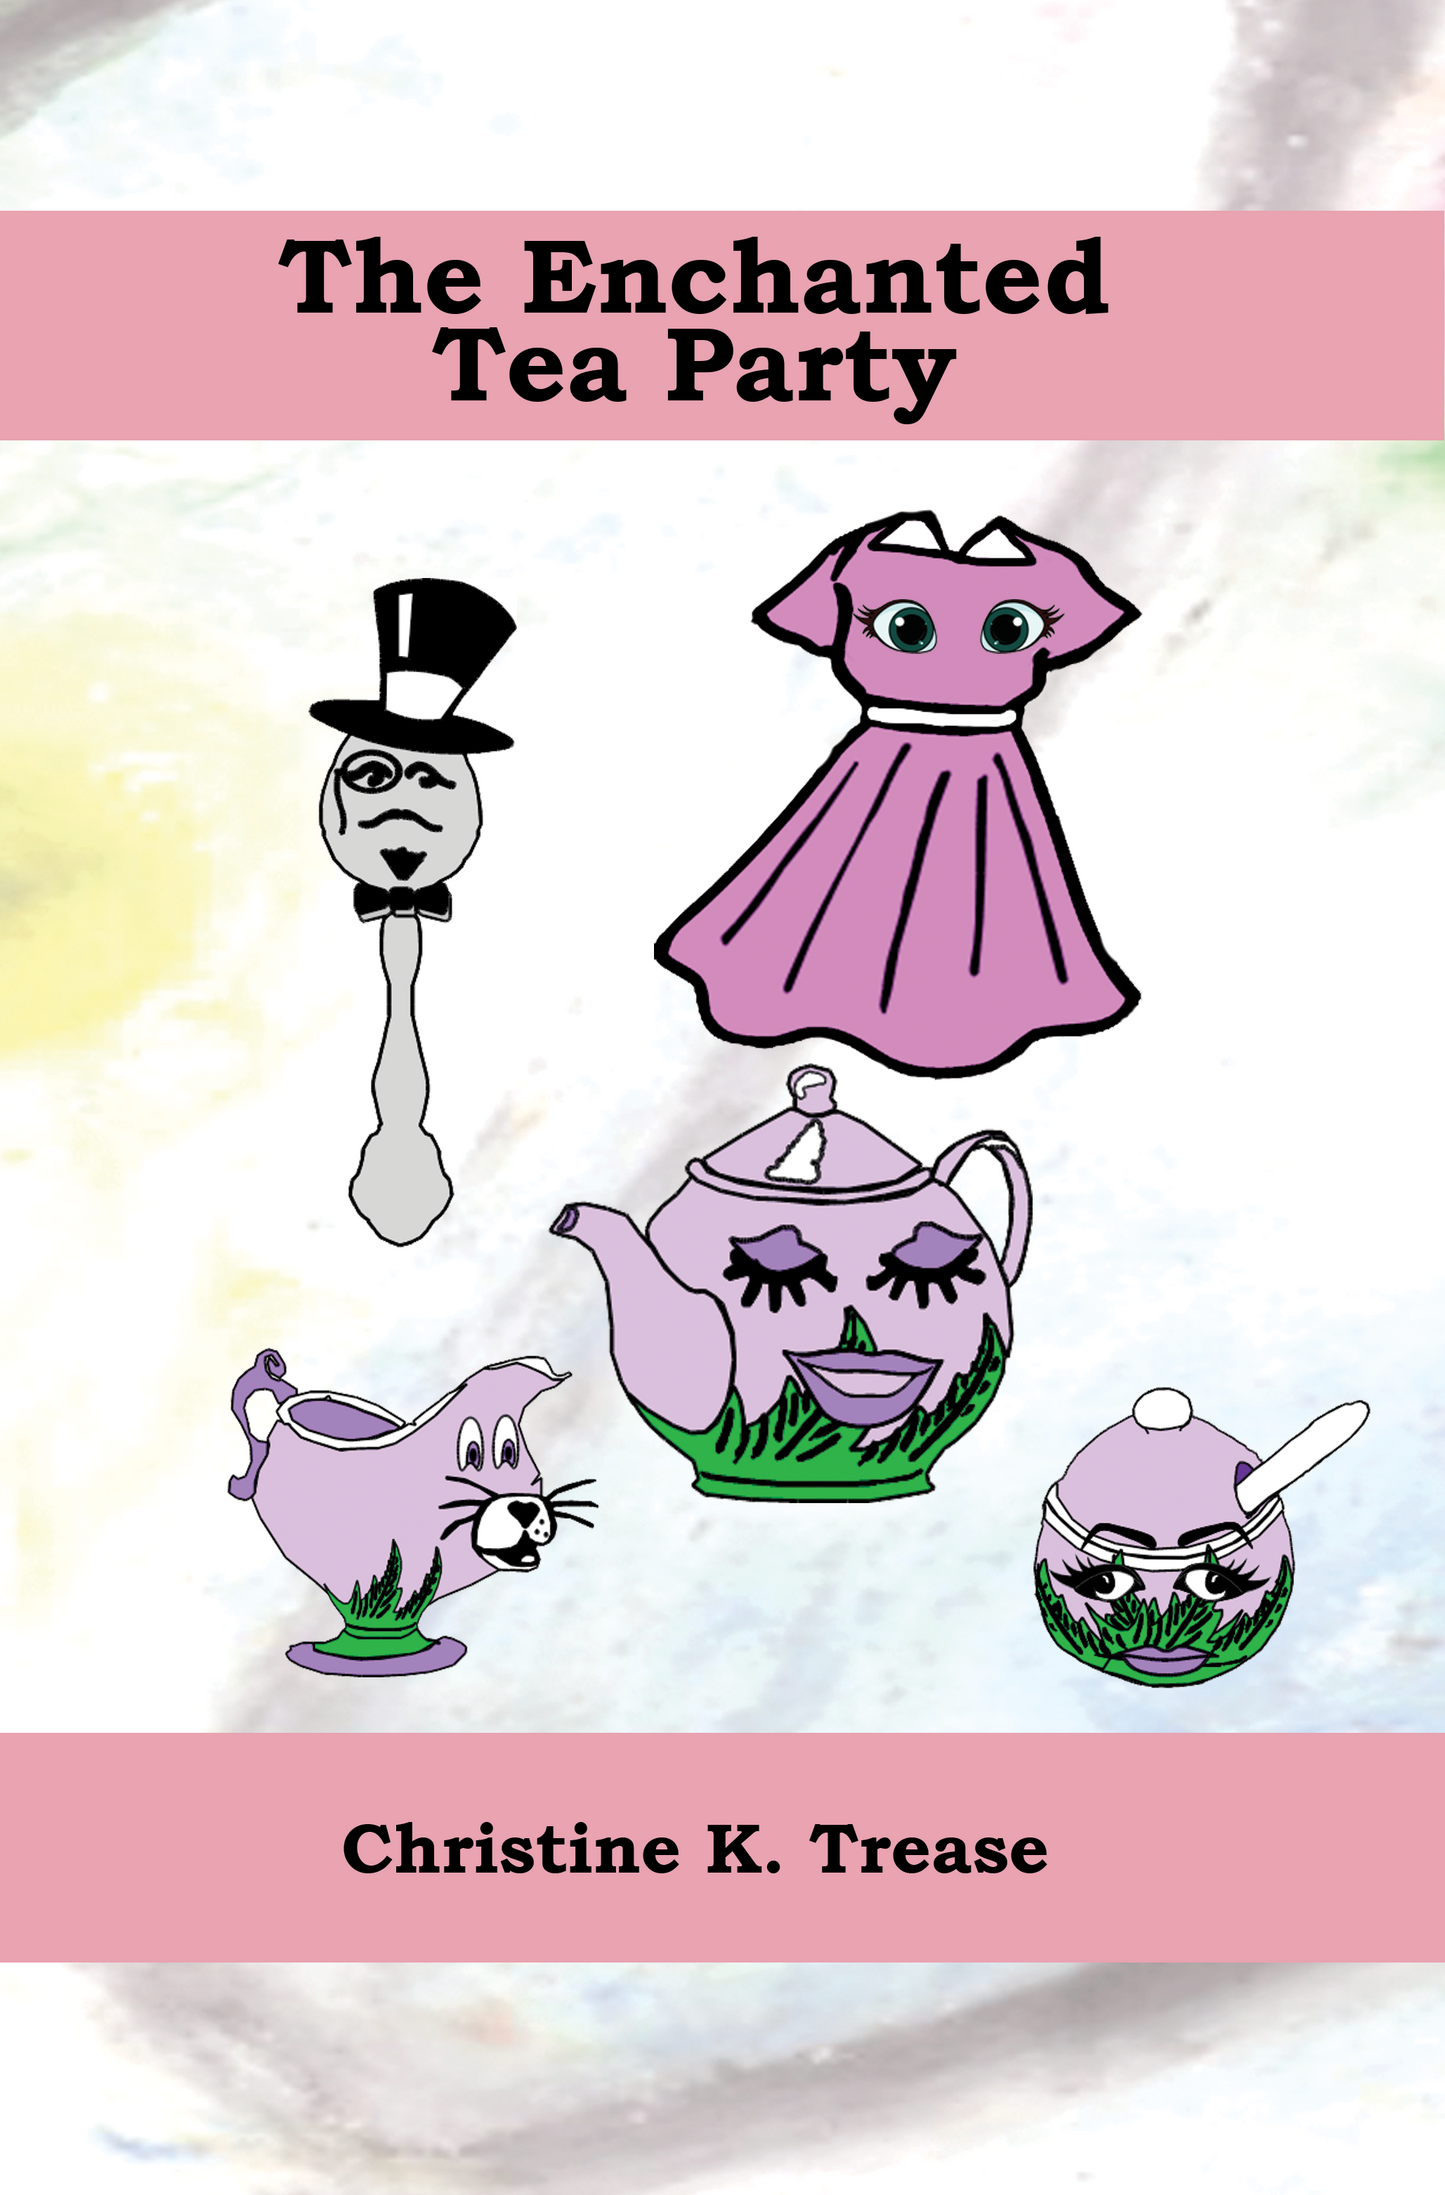 Book Children's-The Enchanted Tea Party